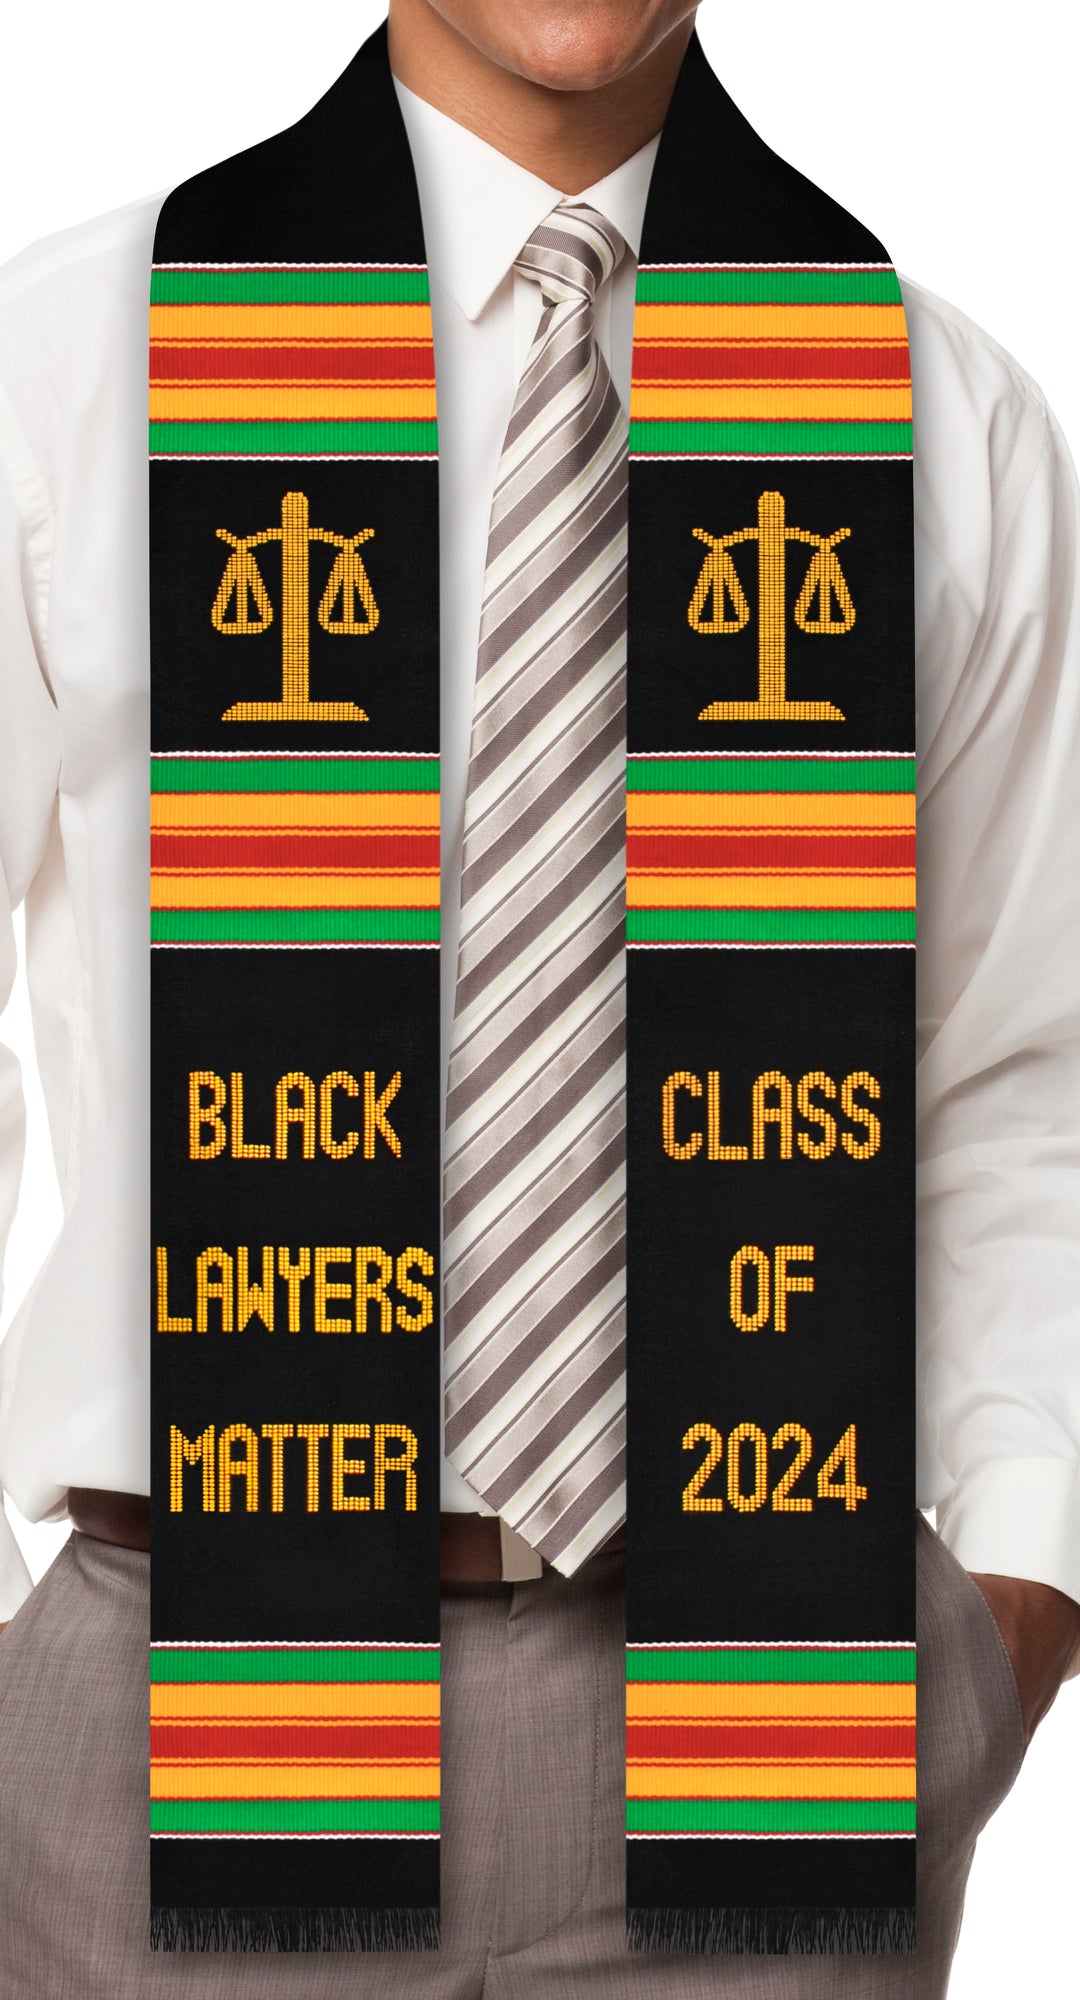 Black Lawyers Matter Class of 2024 Kente Graduation Stole with Scale Symbols for Law, Lawyers and Juris Doctors